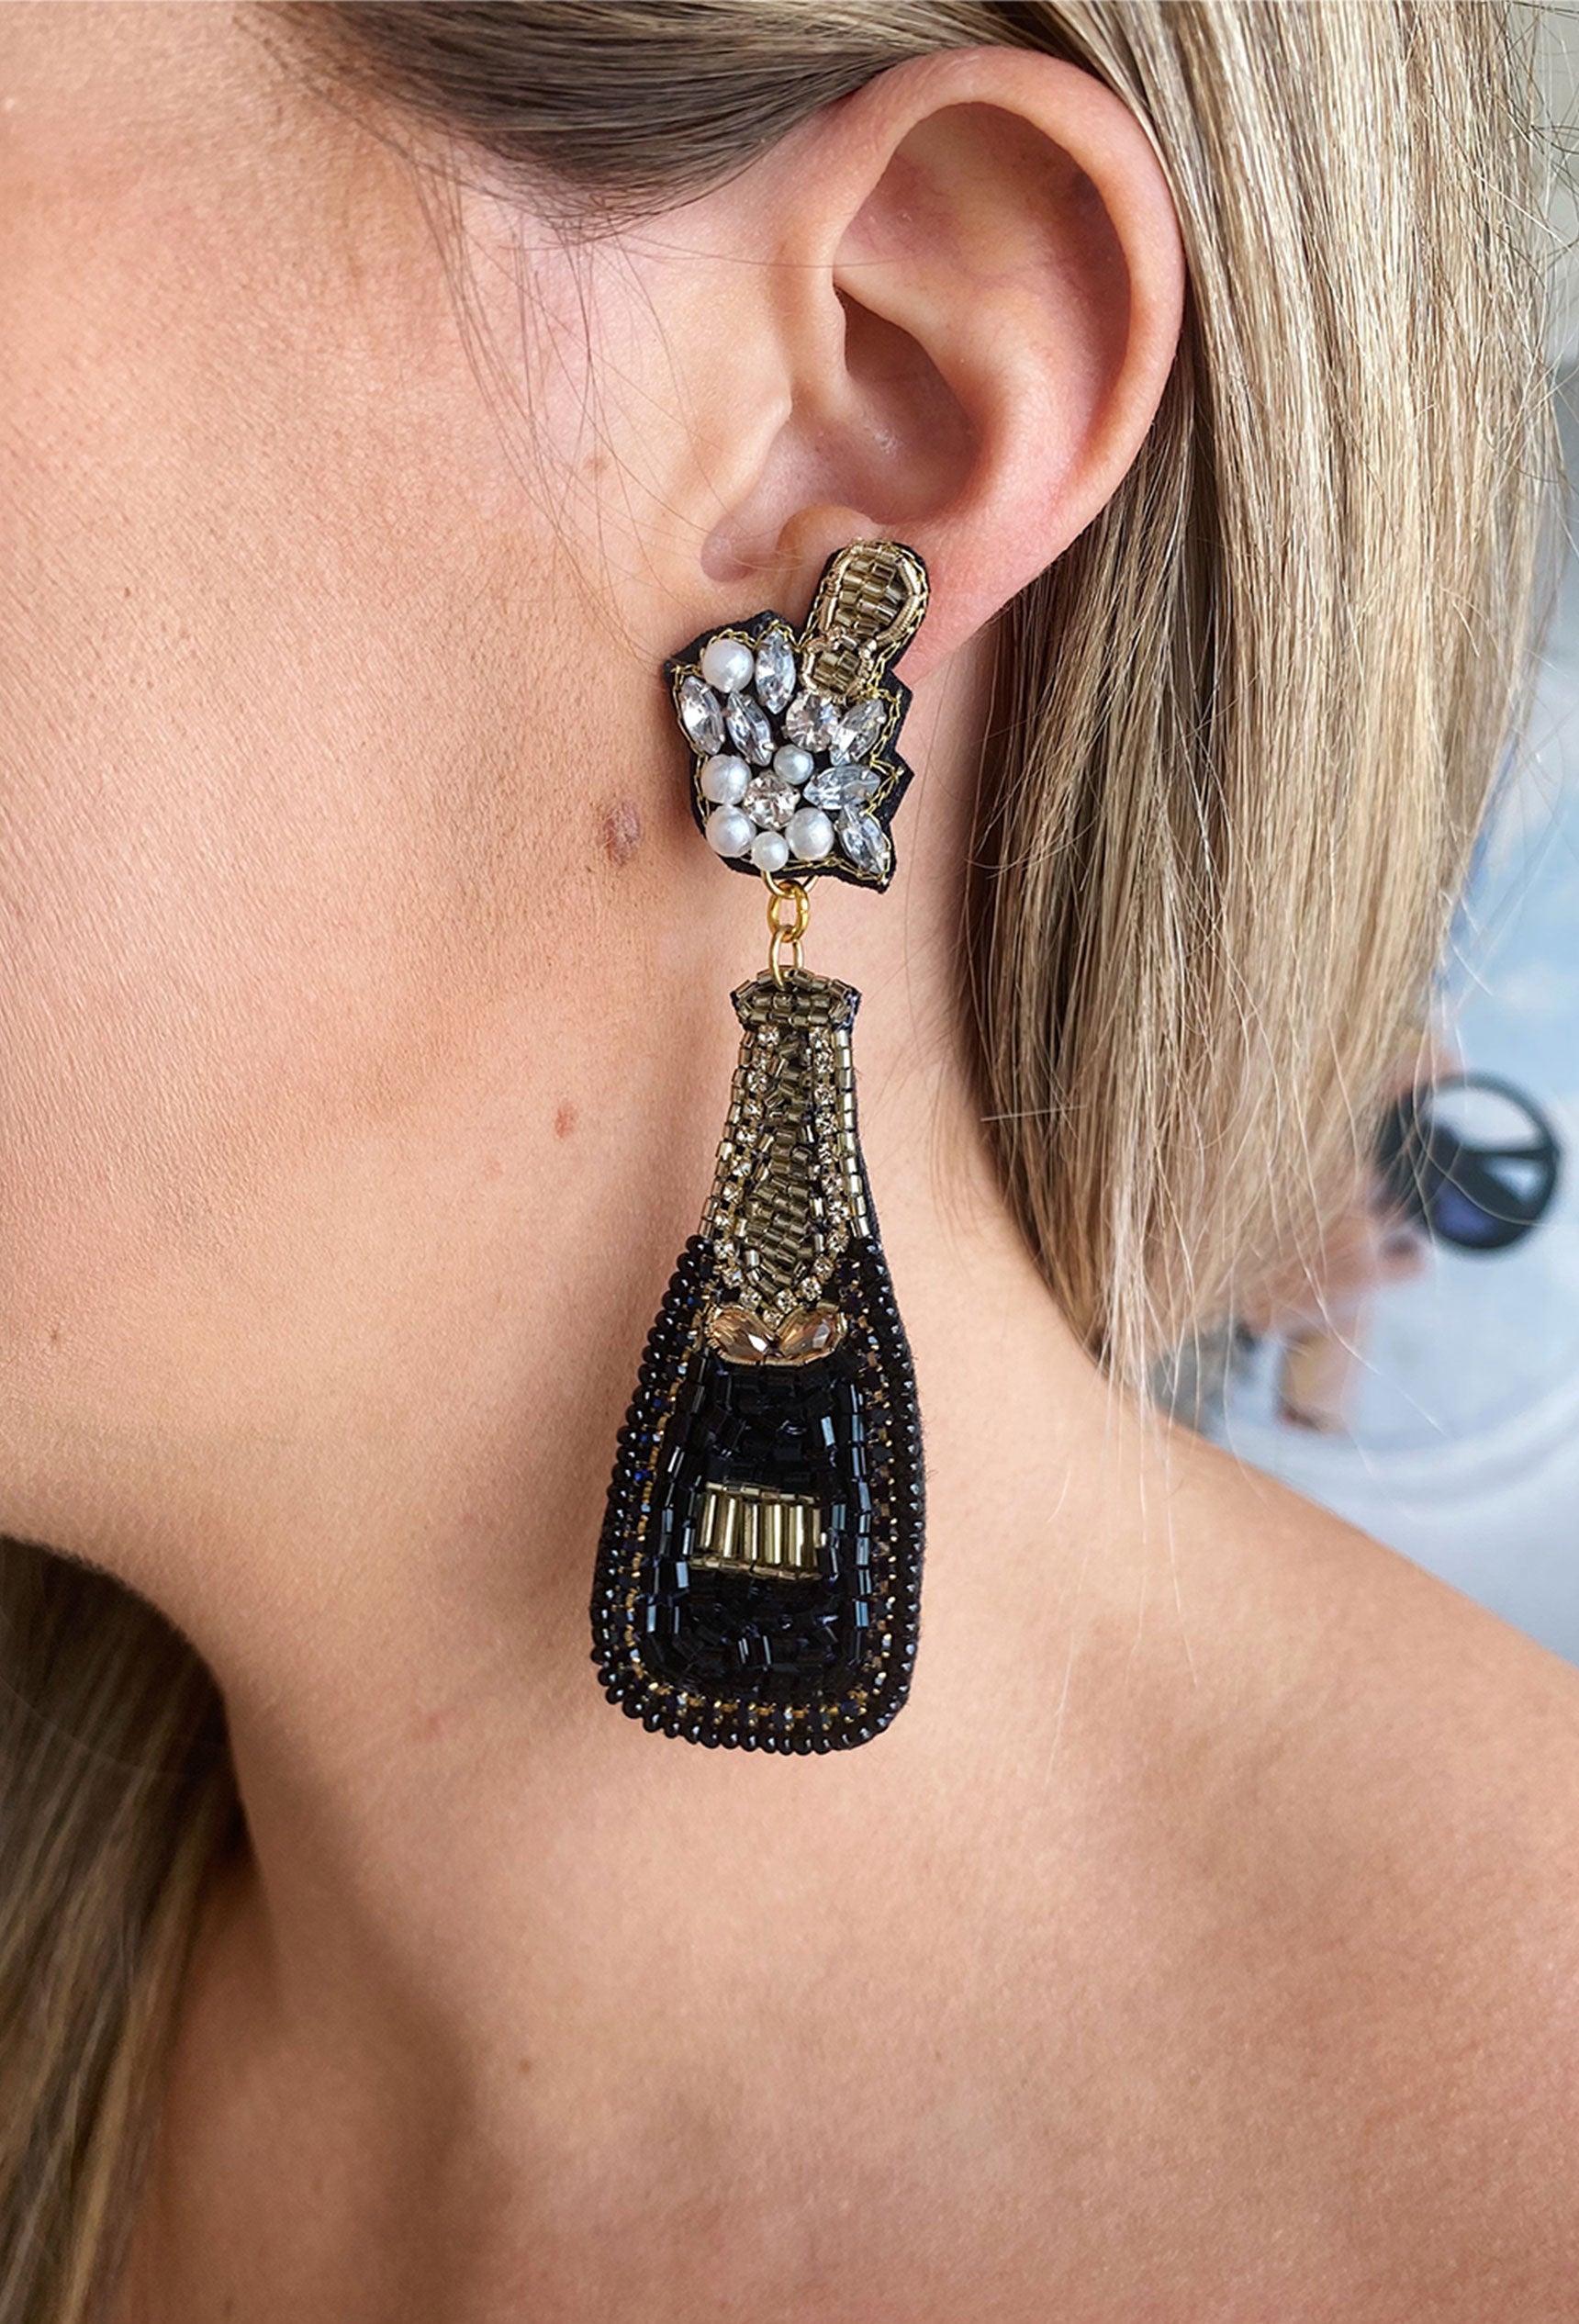 Endless Nights Bottle Beaded Earrings, black and gold beads in the shape of a champagne bottle, cork popping off, post backing